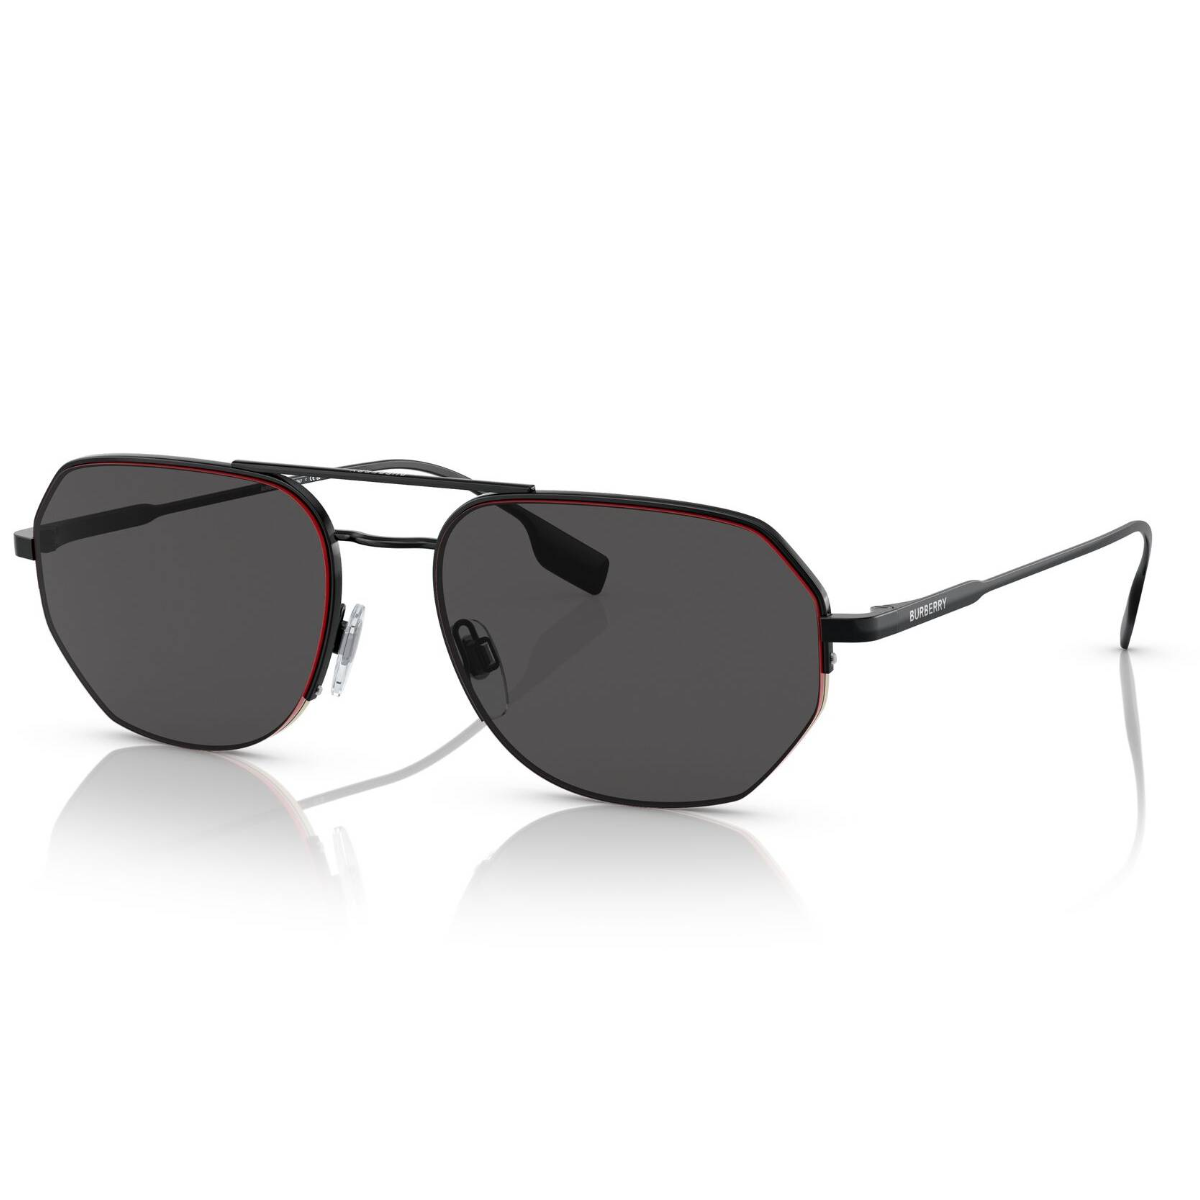 "Find your perfect pair of Burberry 3140 sunglasses for men at Optorium: From classic pilot shape to polarized and non-polarized designs, shop now for the best sunglasses brands for men."